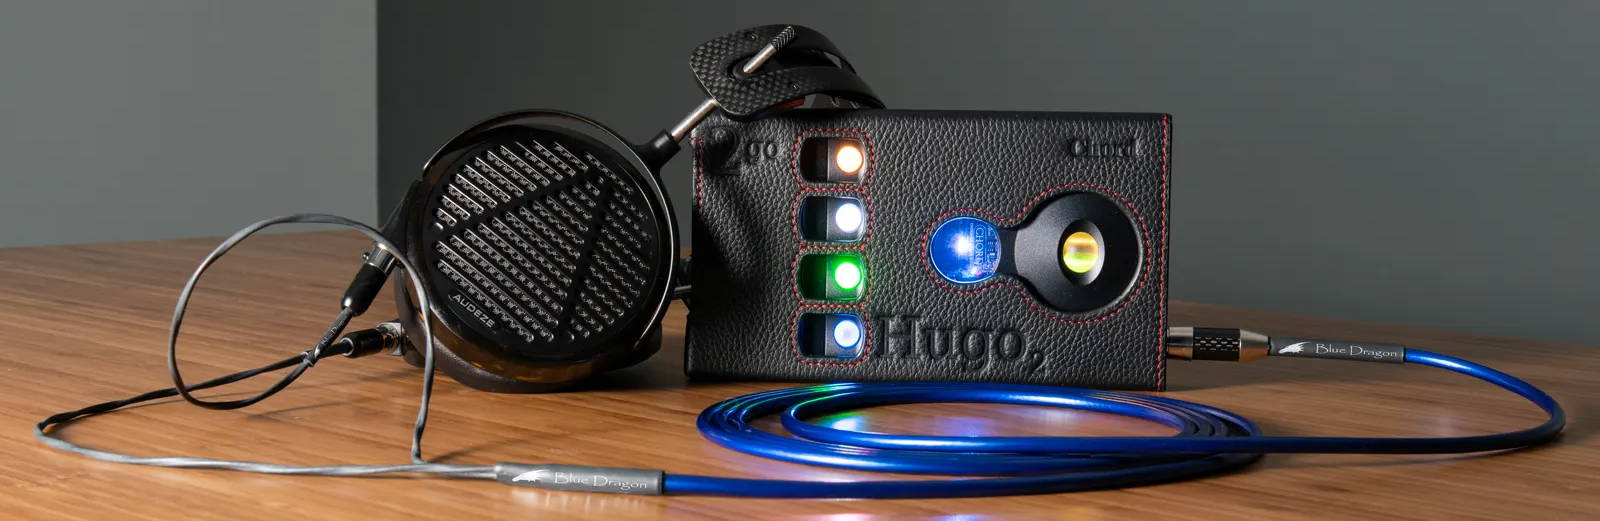 Audeze LCD-5 with Chord Hugo and Blue Dragon cable